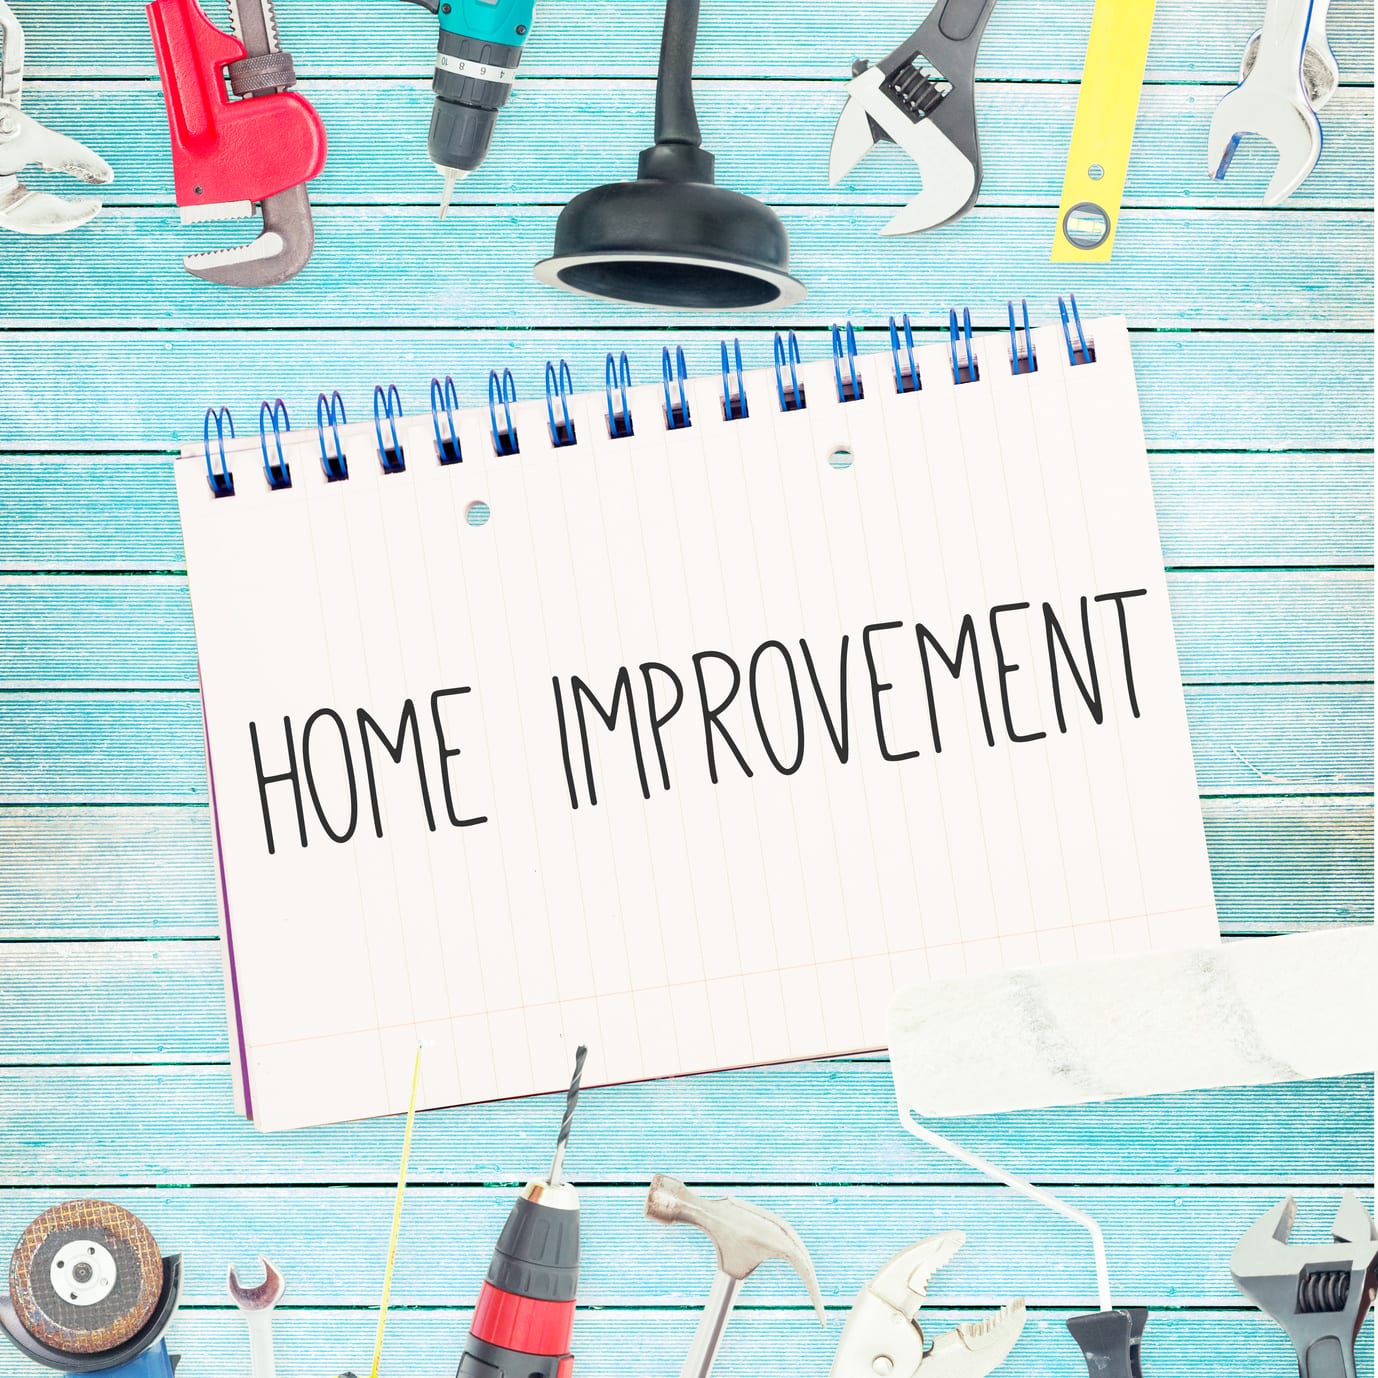 The word home improvement against tools and notepad on wooden background